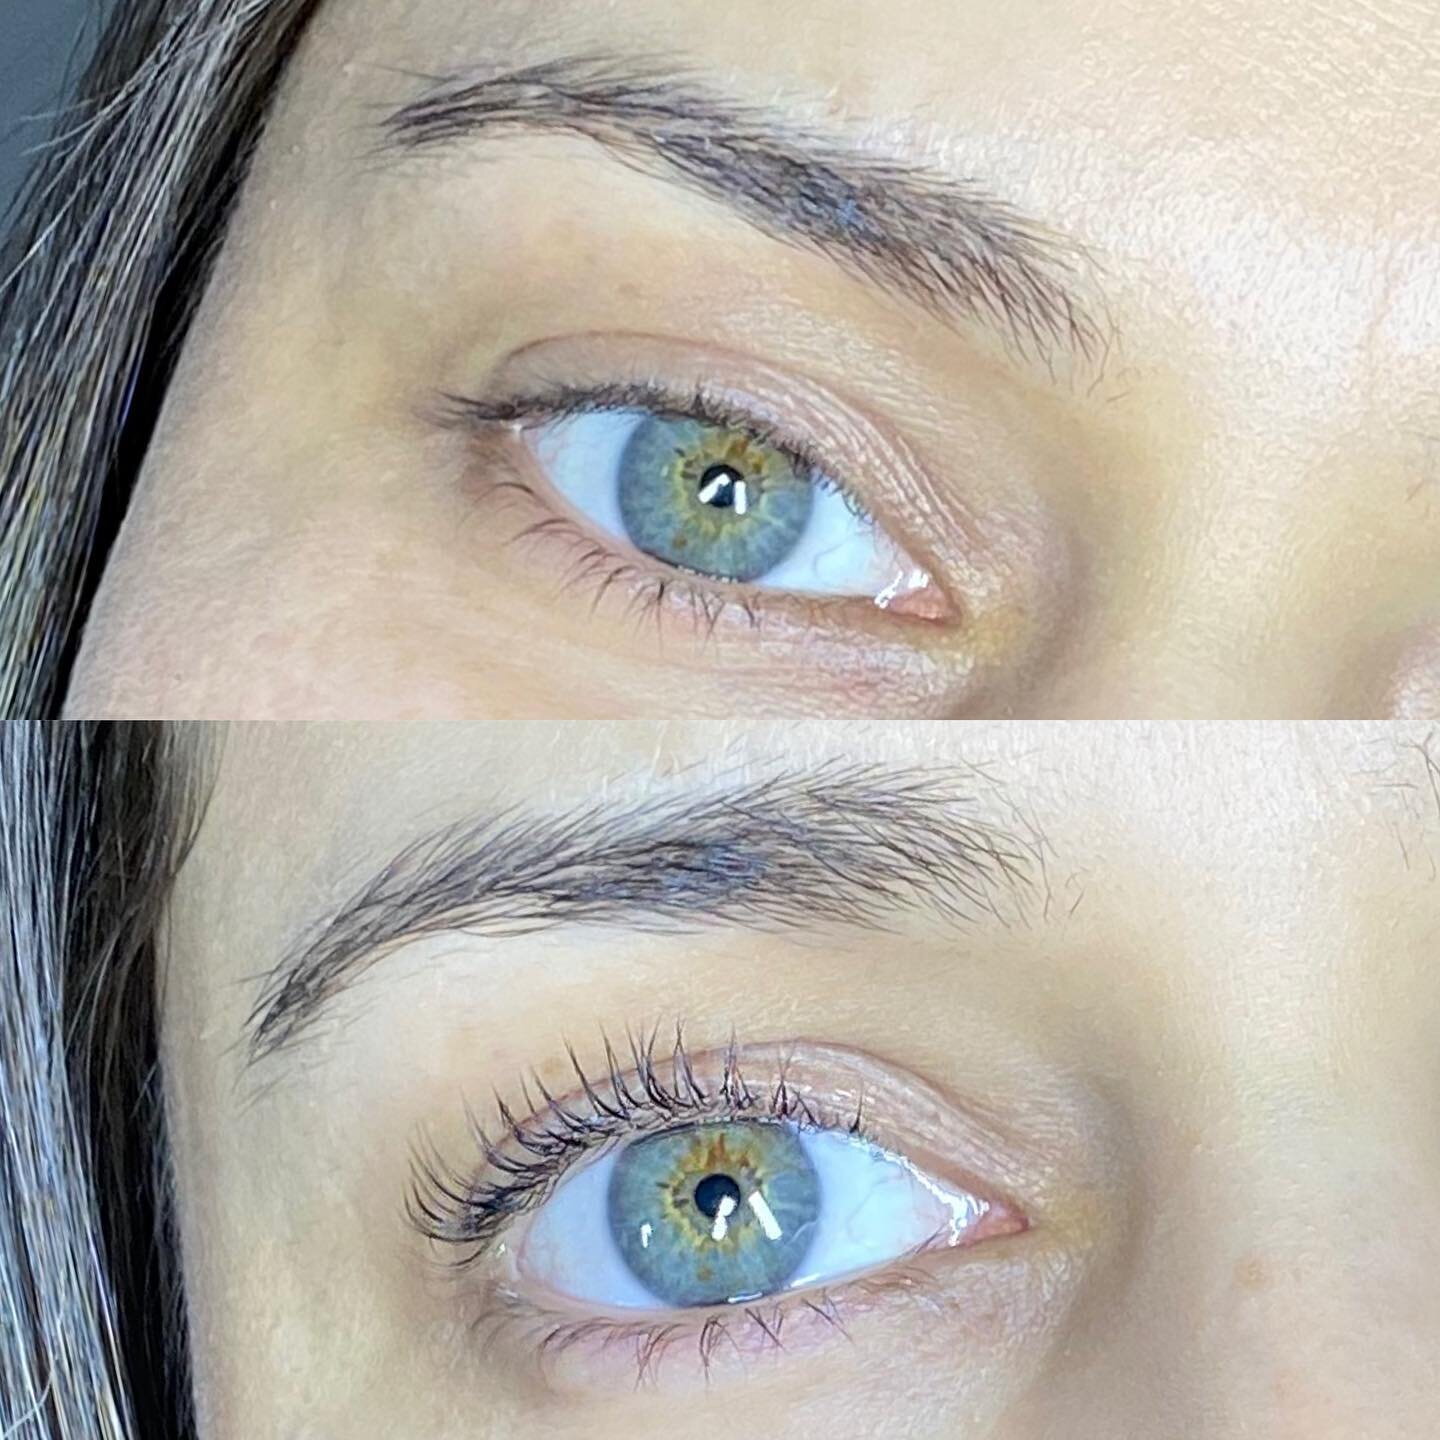 Lash Lifts have become the new craze! Let me show you how we can lift your natural lashes ❤️ 

+ quick and easy process 
+ pain free 
+ lasts 6-8 weeks 
+ you can wear mascara 
+ low maintenance 

**and... ON SALE 😉 $80 regular price $120

#lashesor